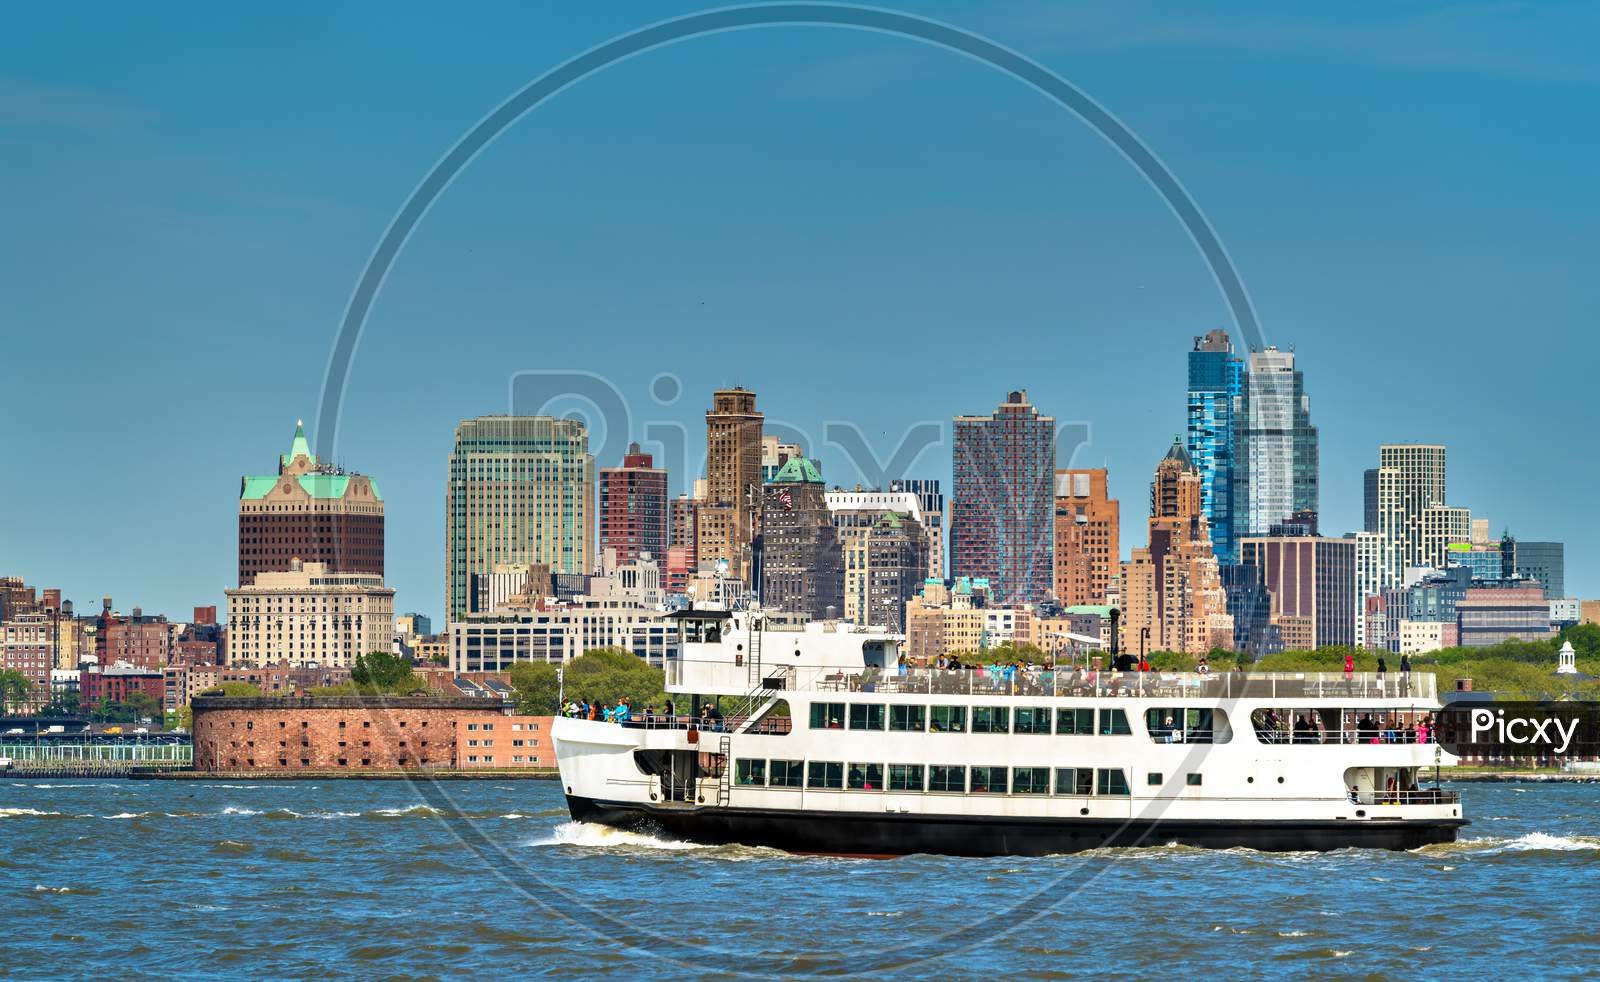 Ferry Connecting New York City, Liberty And Ellis Islands And Jersey City